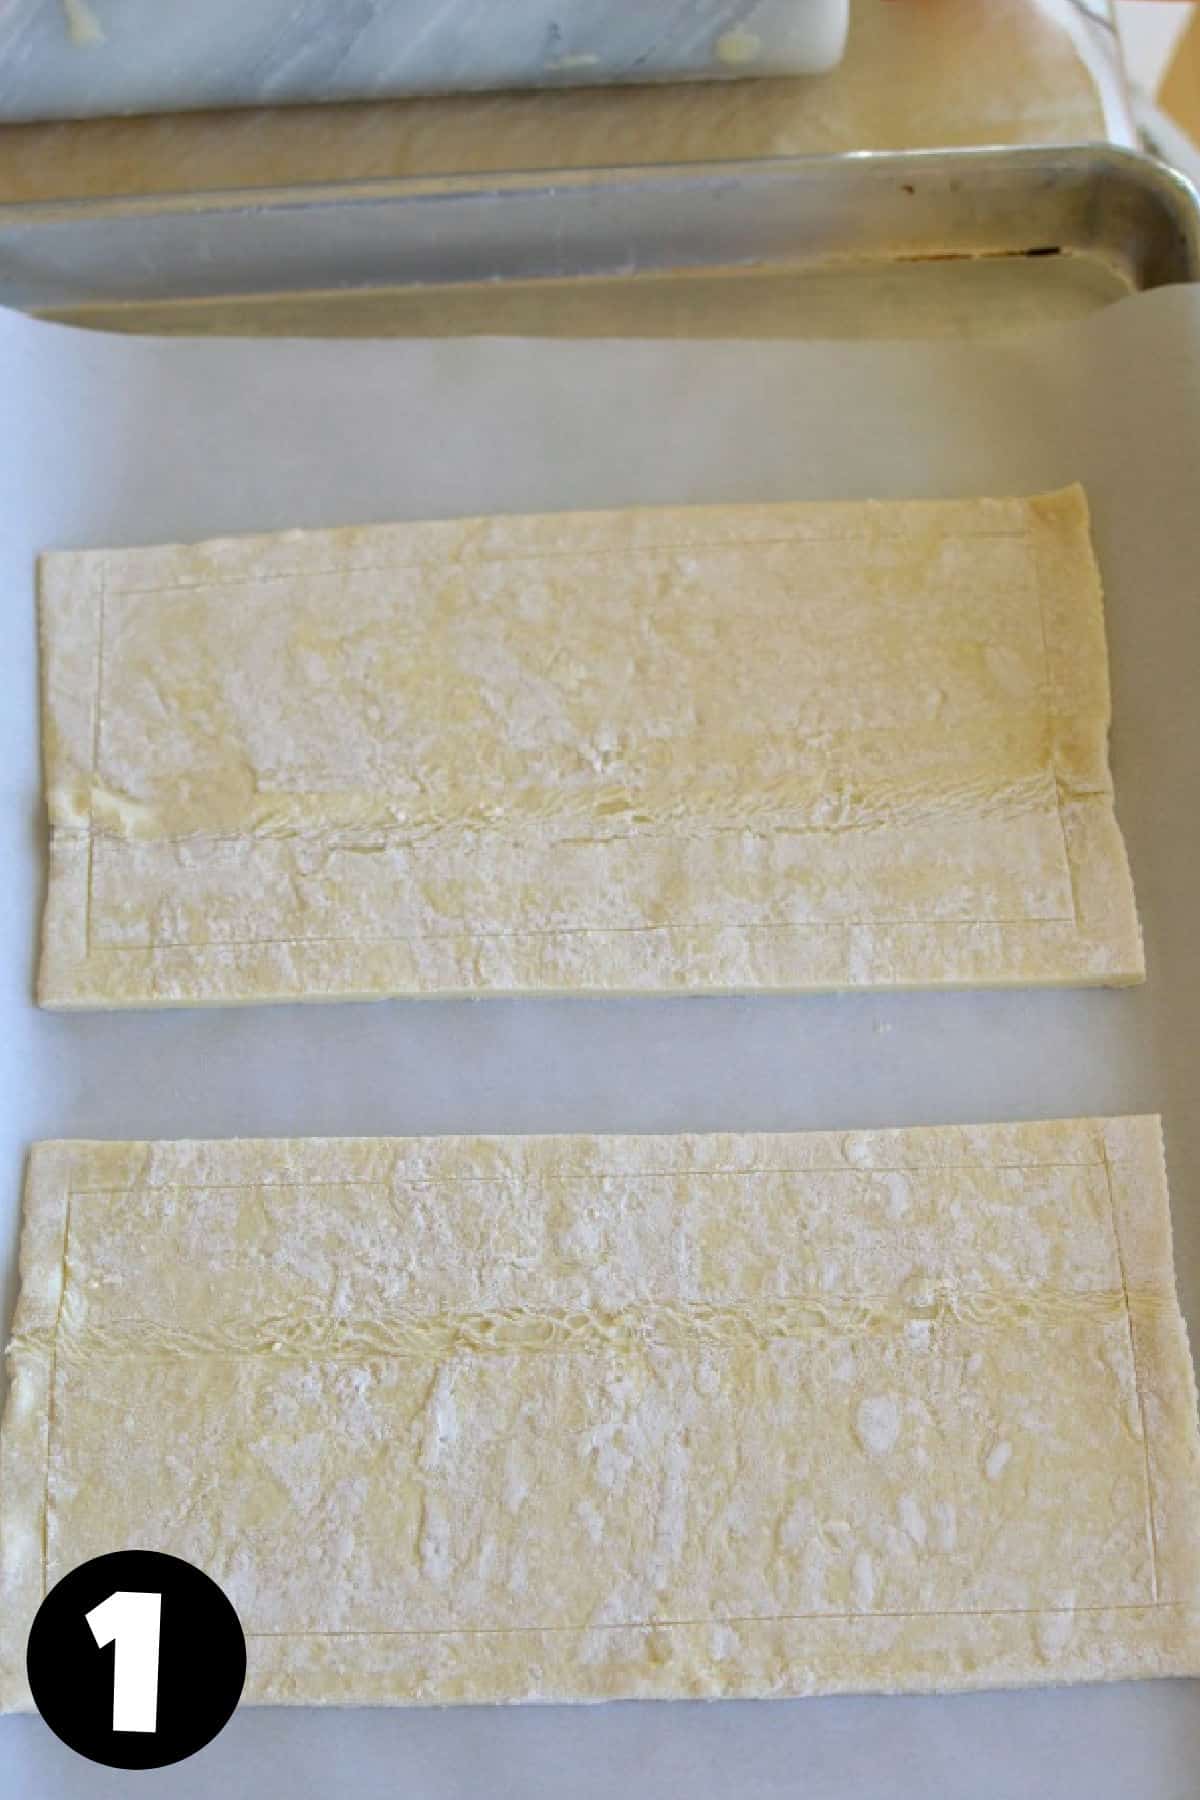 Thawed puff pastry on a baking sheet.